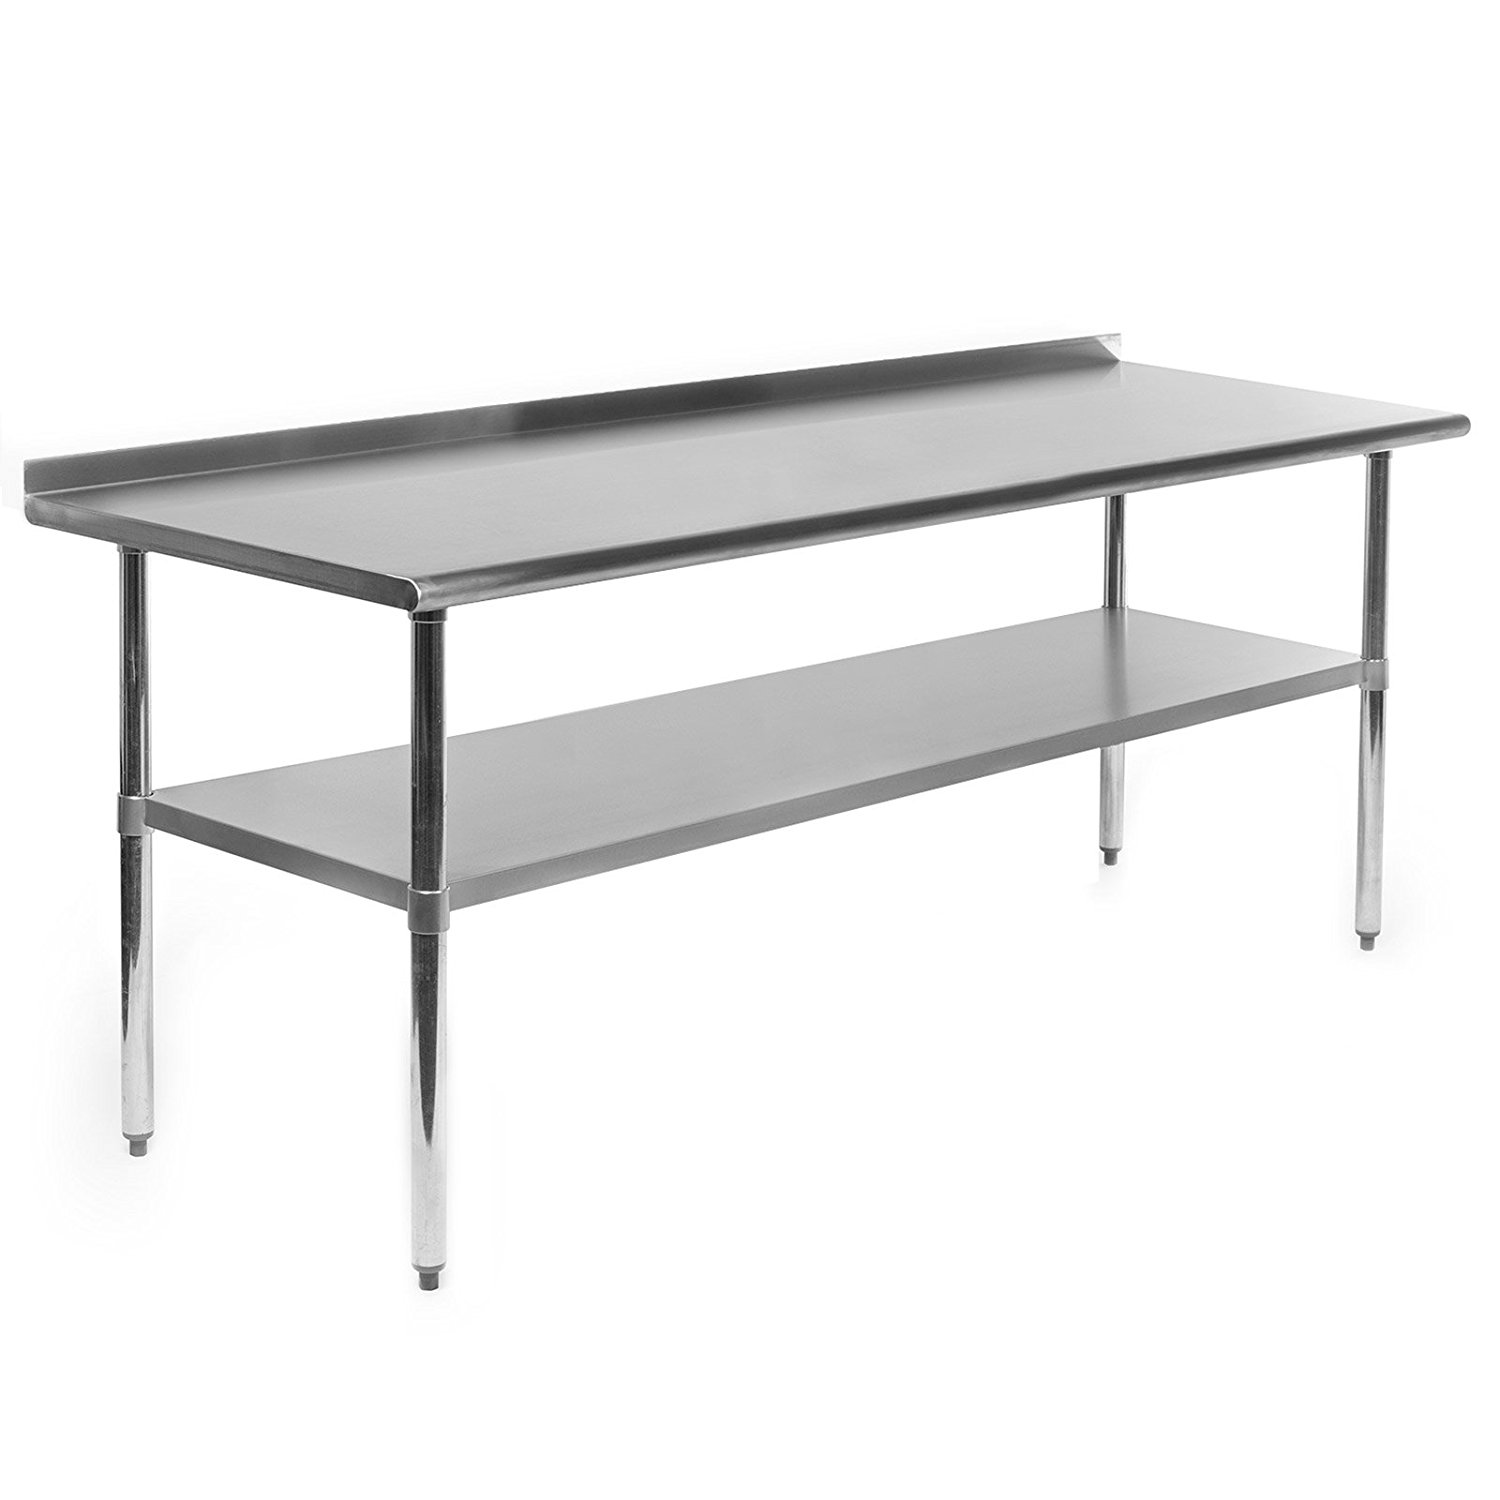 Restoration Stainless Steel Cleaning and Prep Table 6 Ft X 2 Ft with Stainless Steel Table 6 Ft